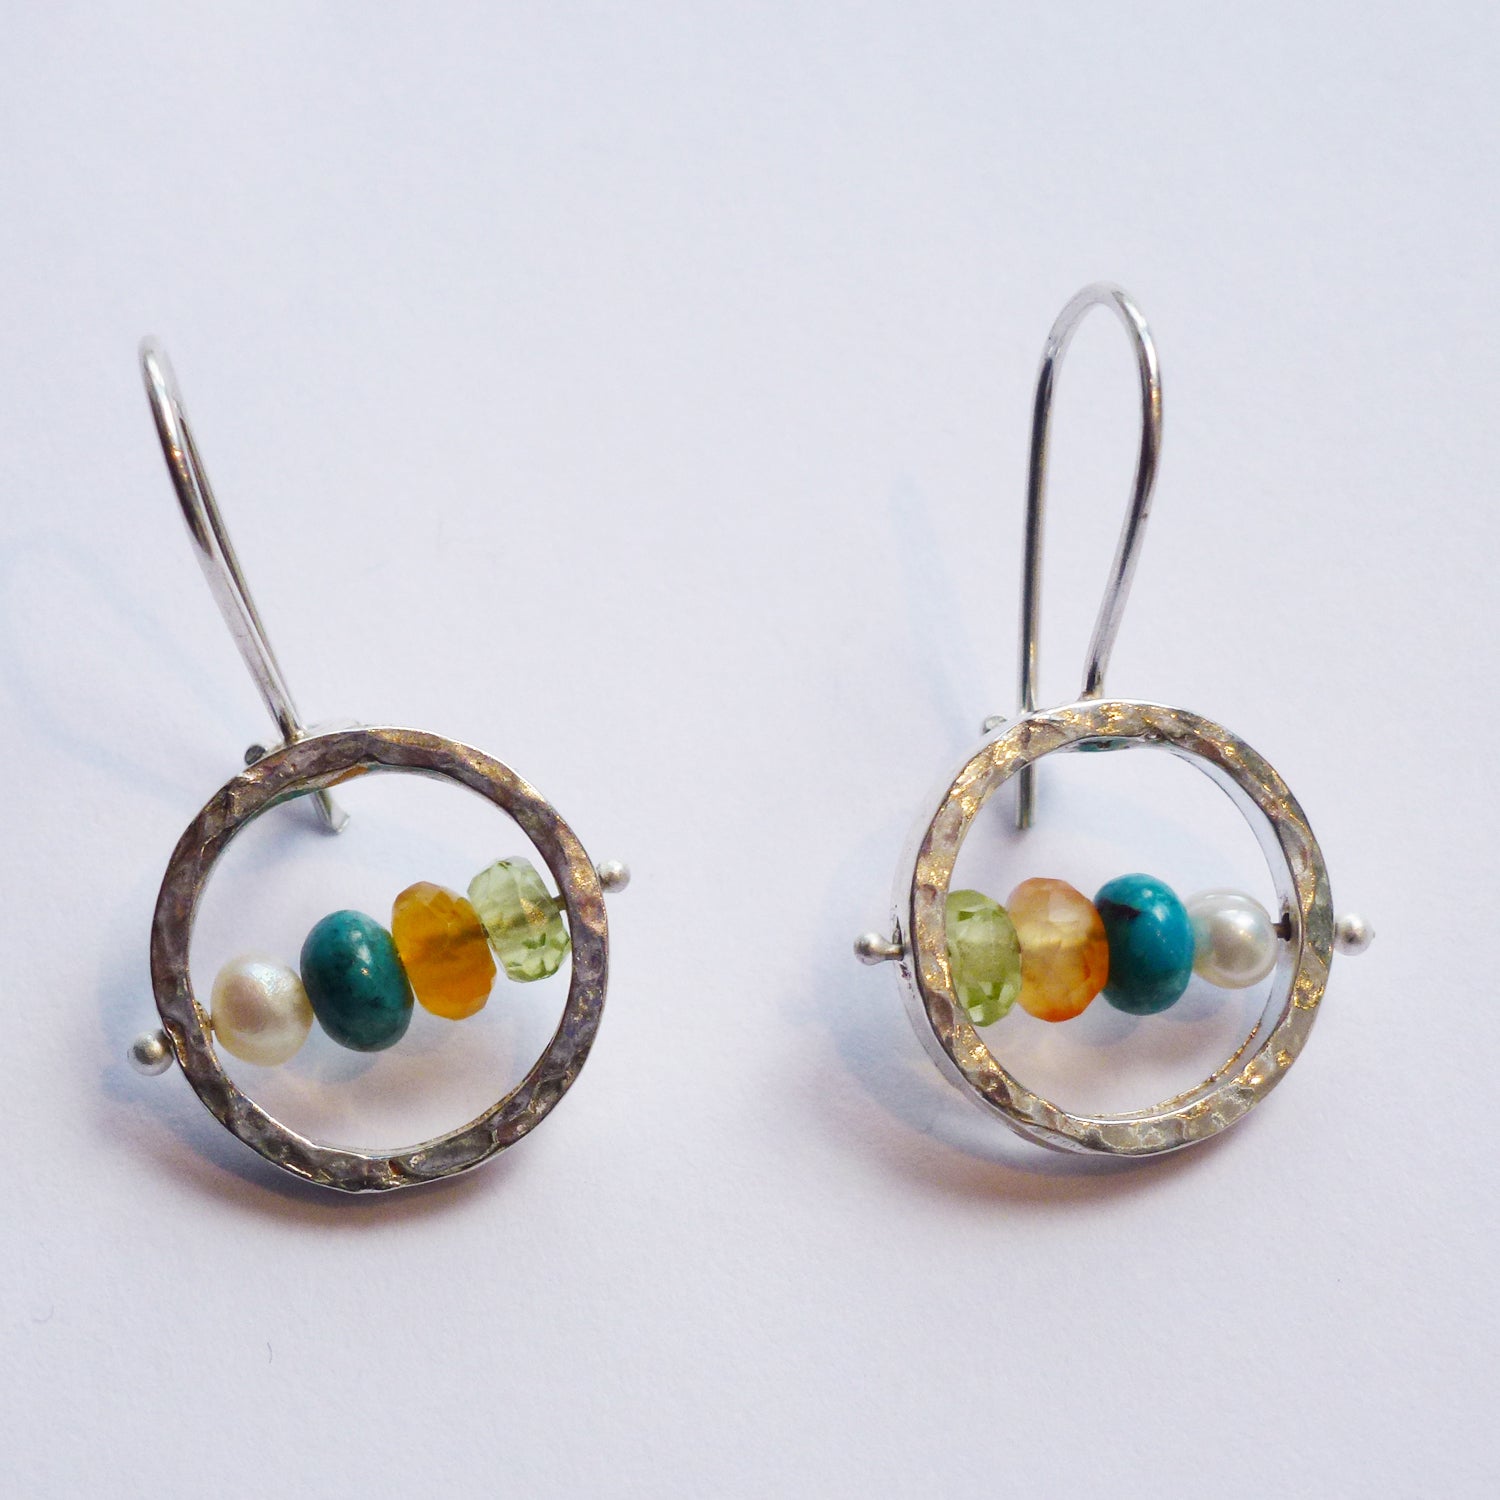 Yair Stern - Short Circle Earrings with Multicolored Beads